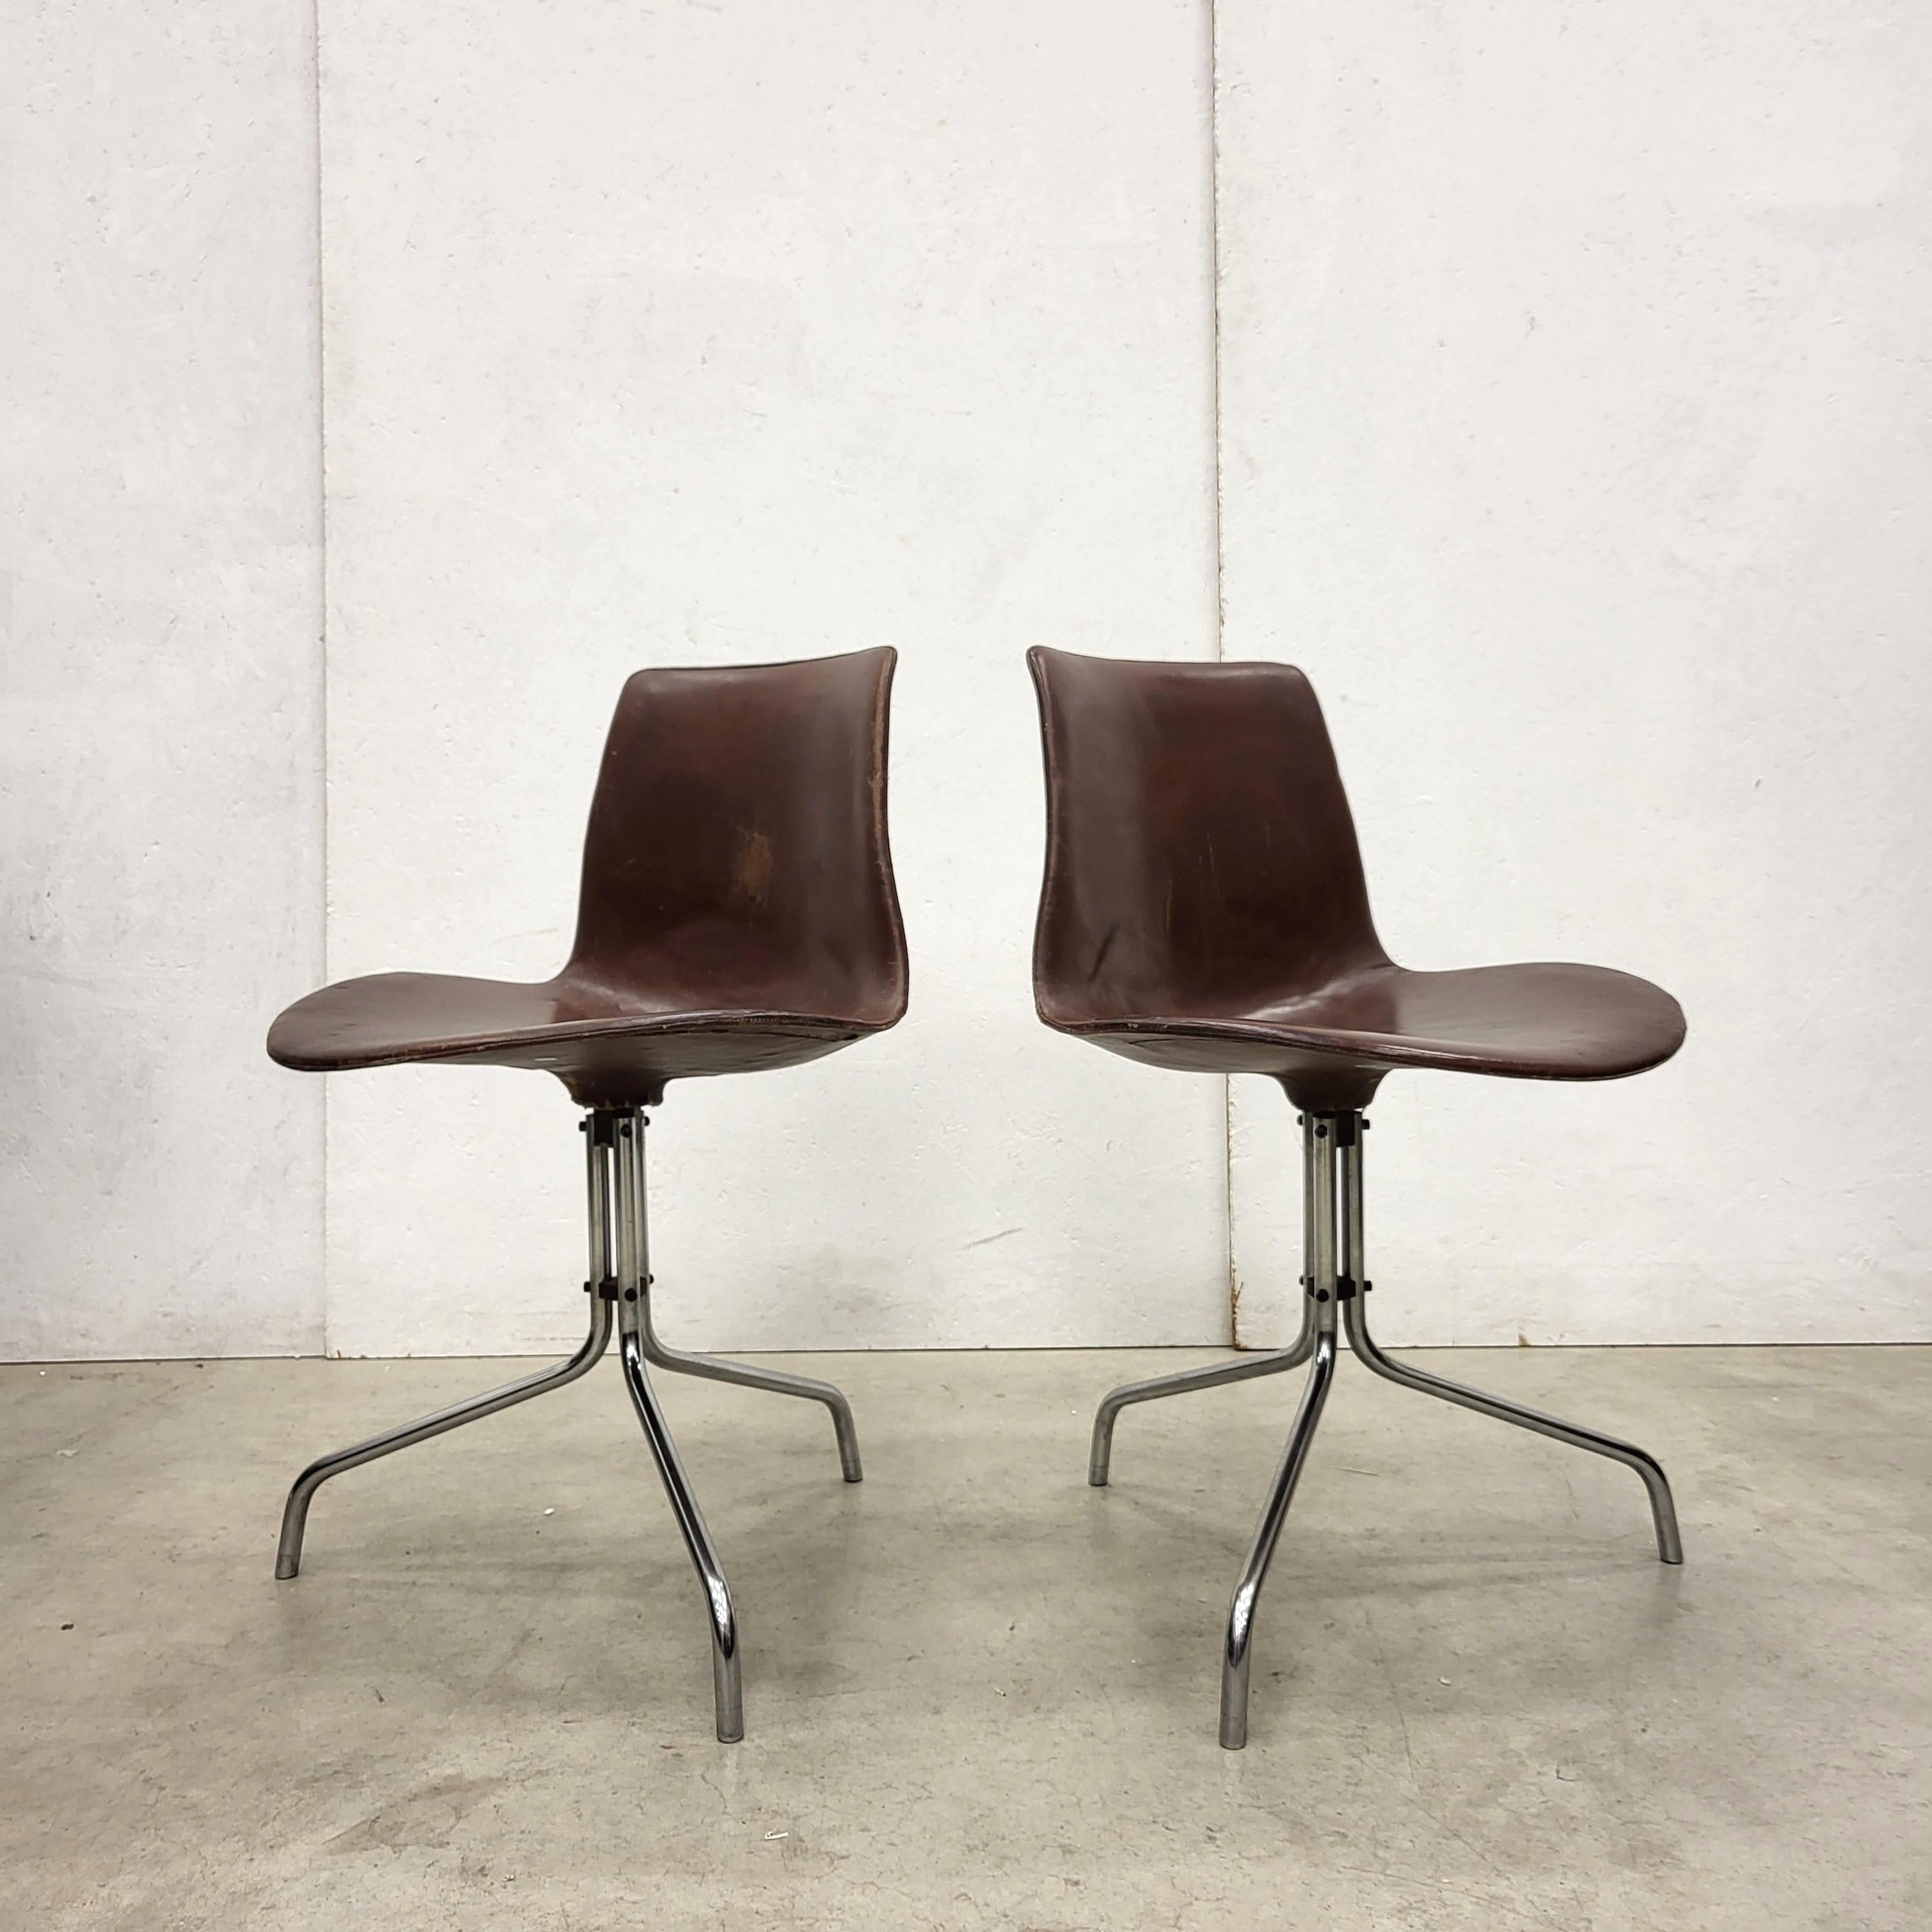 Rare pair model BO611 desk chairs by Jorgen Kastholm & Preben Fabricius.
The chairs were manufactured by Bo-Ex in Denmark in the mid-1960s.

The chairs features a fibreglass shell with brown leather upholstery on a tripod swivel base of chromed